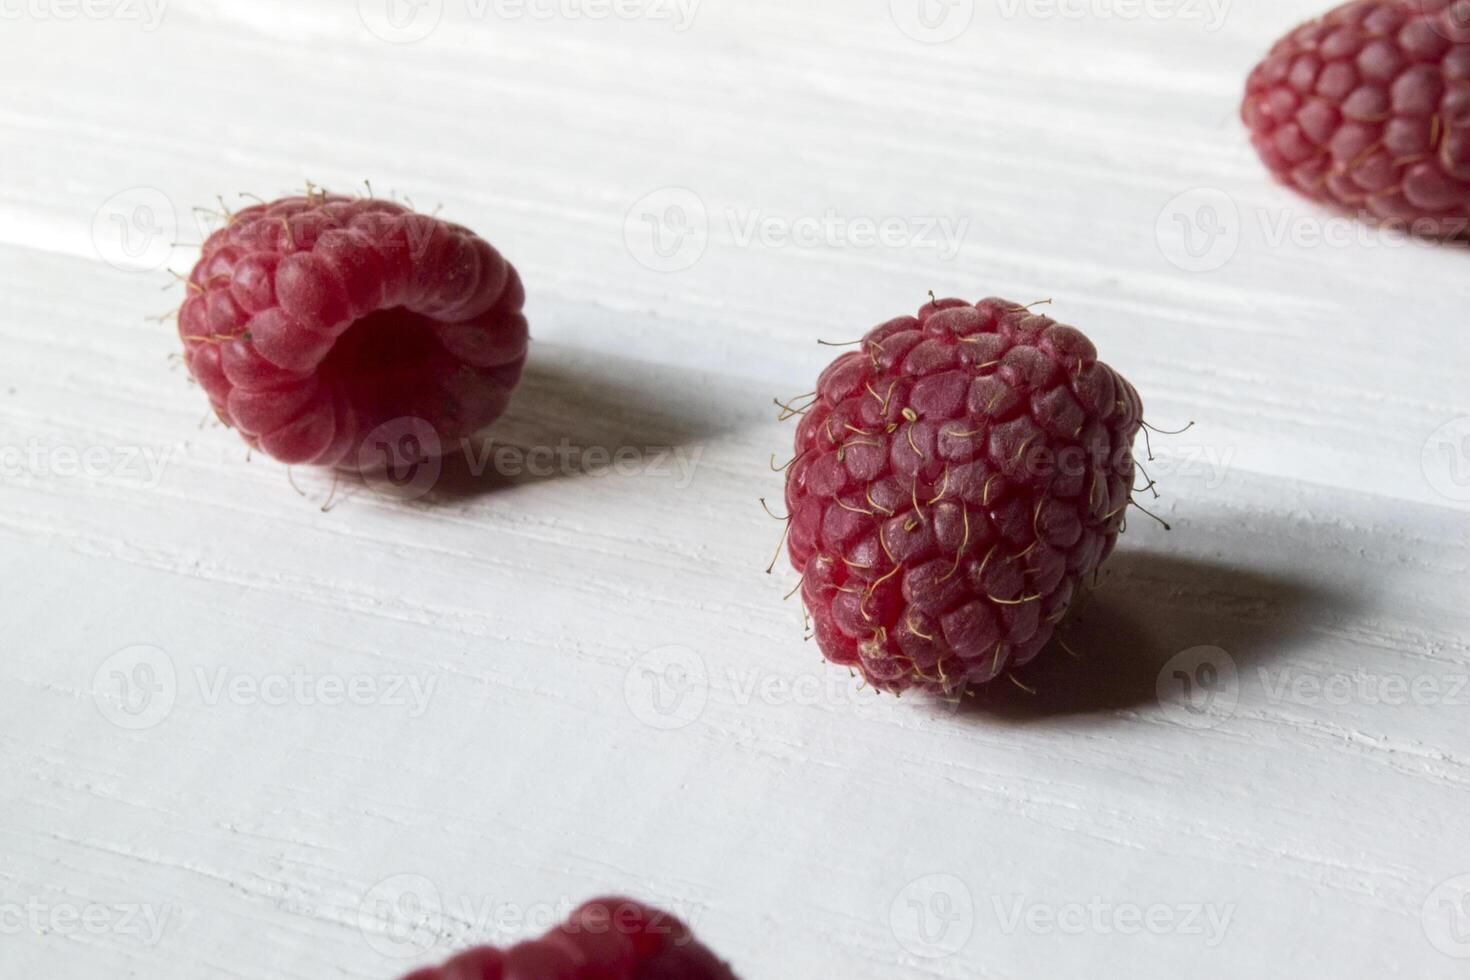 Ripe raspberries on a white wooden background. photo